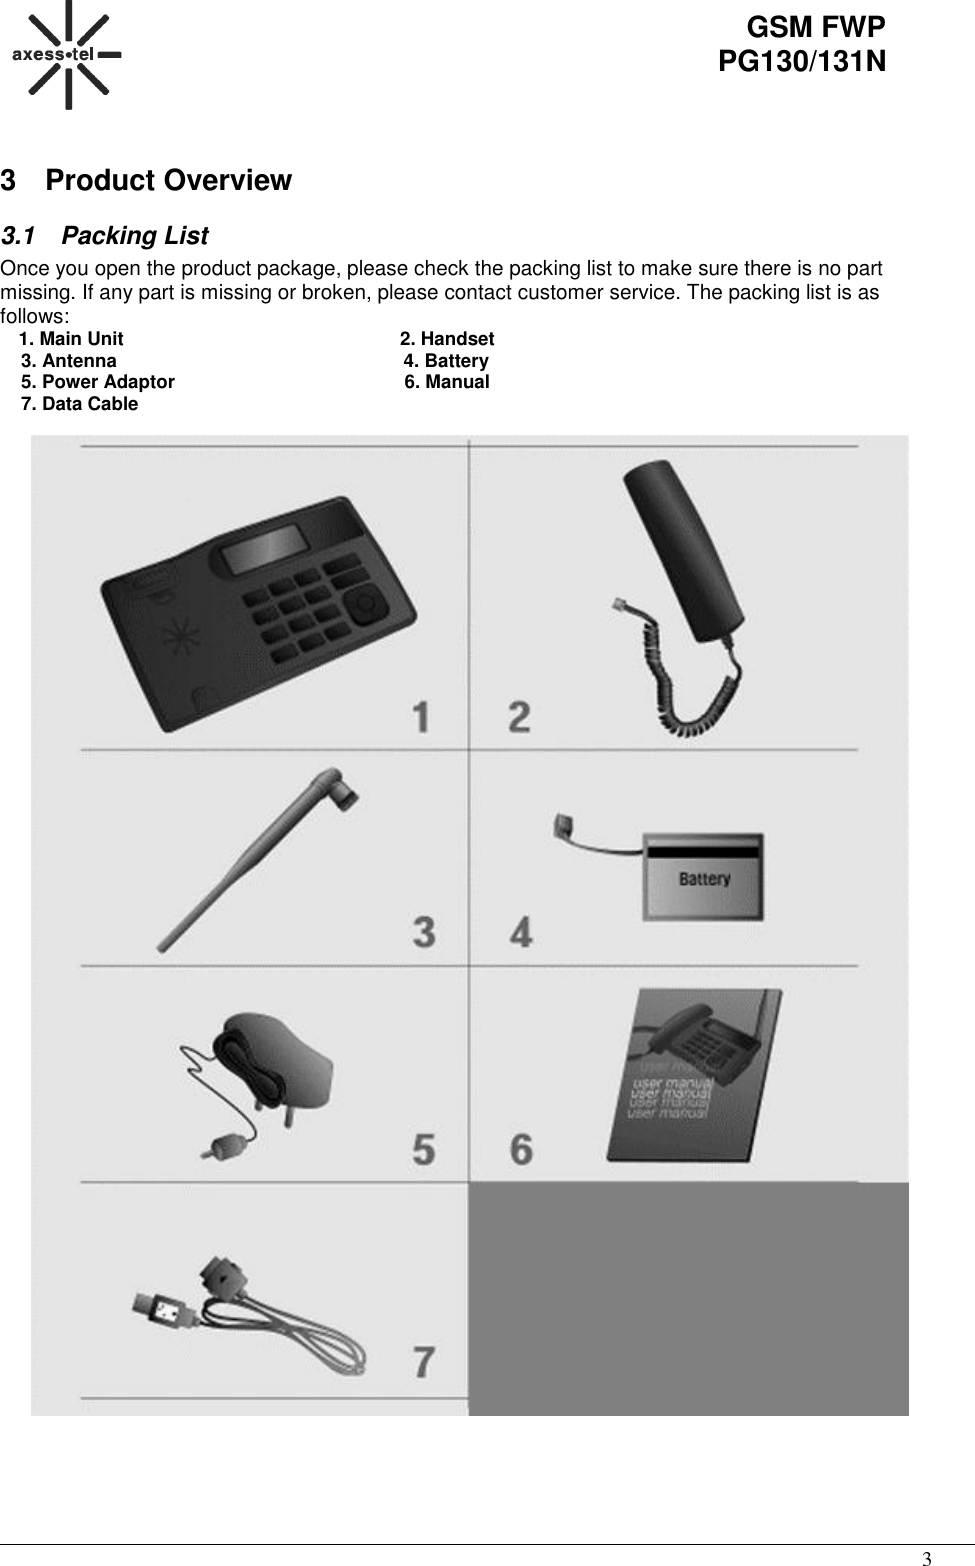                                                                                                     3 GSM FWP PG130/131N 3  Product Overview 3.1  Packing List Once you open the product package, please check the packing list to make sure there is no part missing. If any part is missing or broken, please contact customer service. The packing list is as follows:  1. Main Unit                                                     2. Handset     3. Antenna                                                       4. Battery     5. Power Adaptor                                            6. Manual      7. Data Cable                                                       